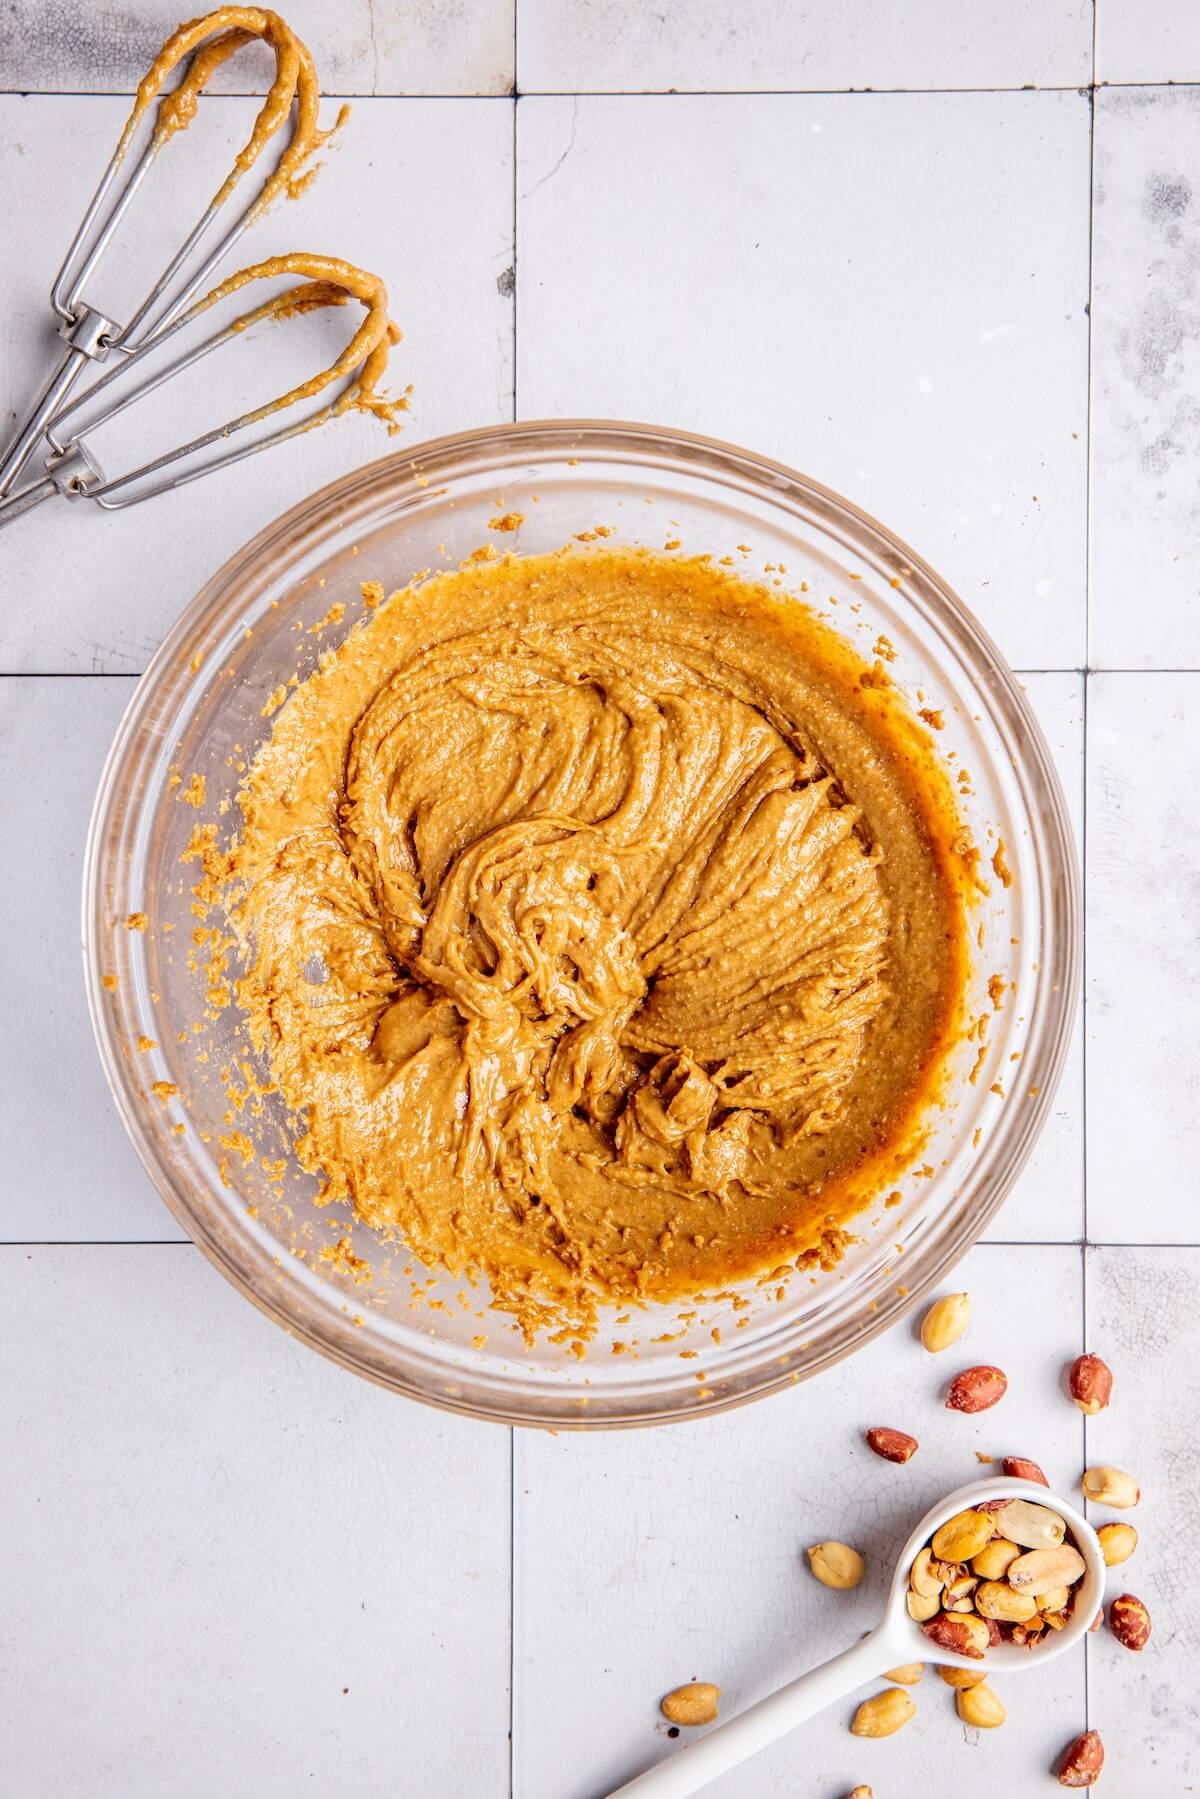 5-Ingredient Peanut Butter Mousse Step 2 - Olivia Adriance